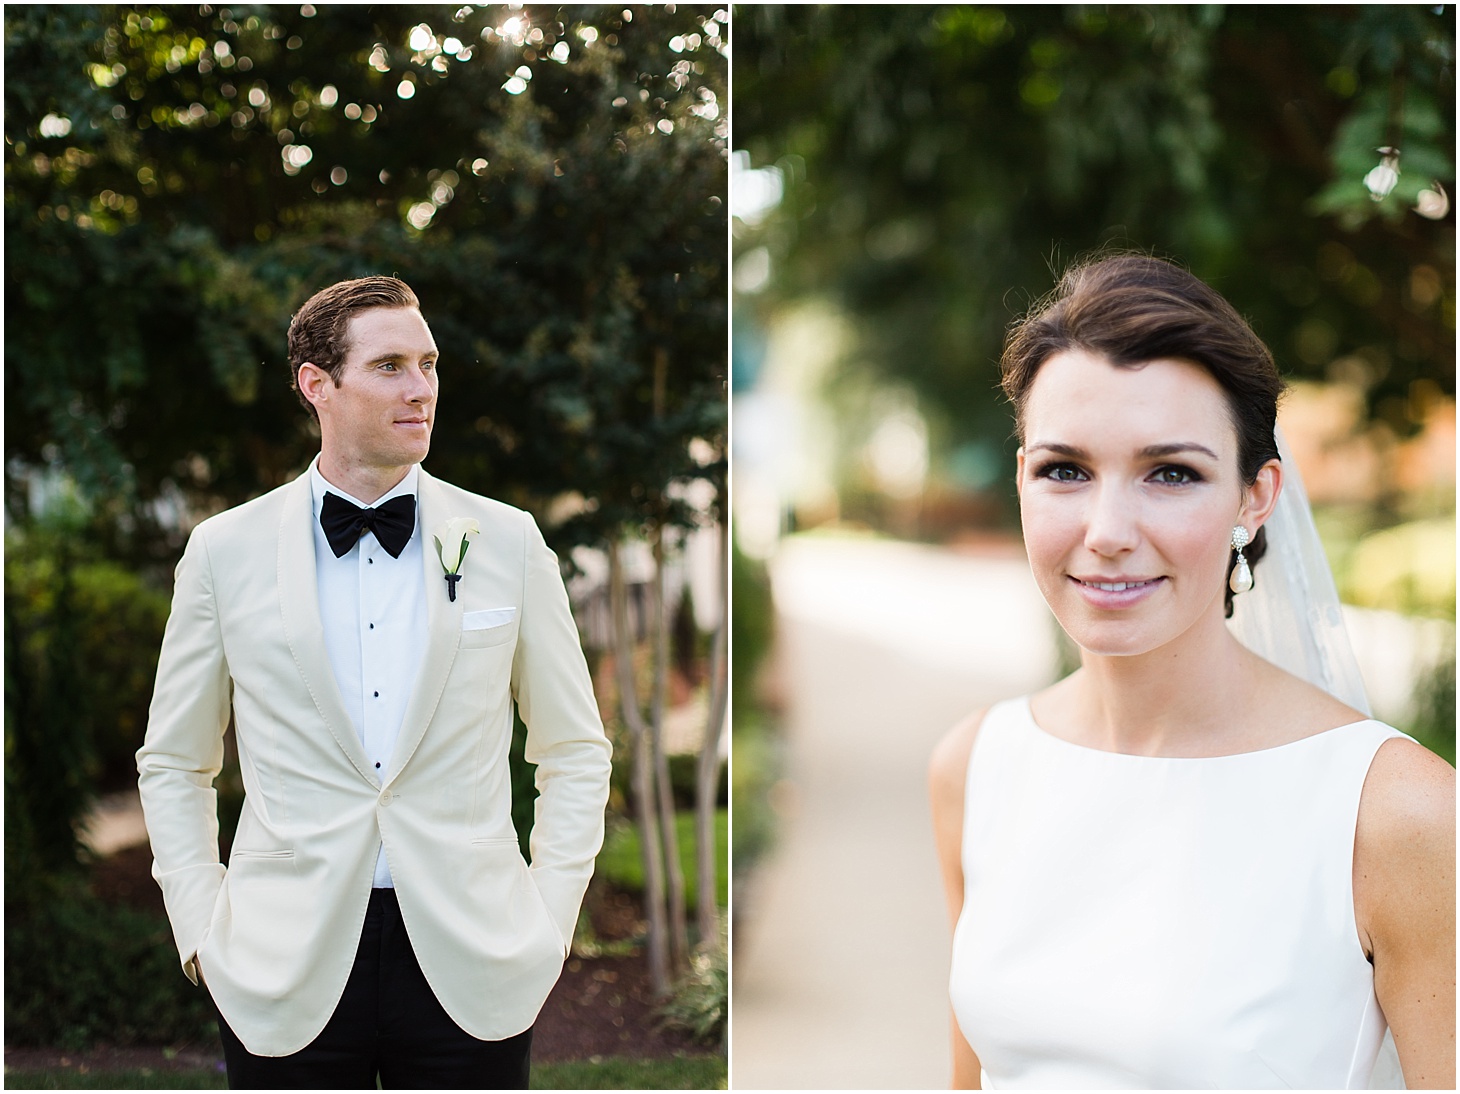 Wedding Portraits at Columbia Country Club | Wedding Ceremony at Cathedral of St. Matthew the Apostle | Classy October Wedding in Washington, D.C. | Sarah Bradshaw Photography